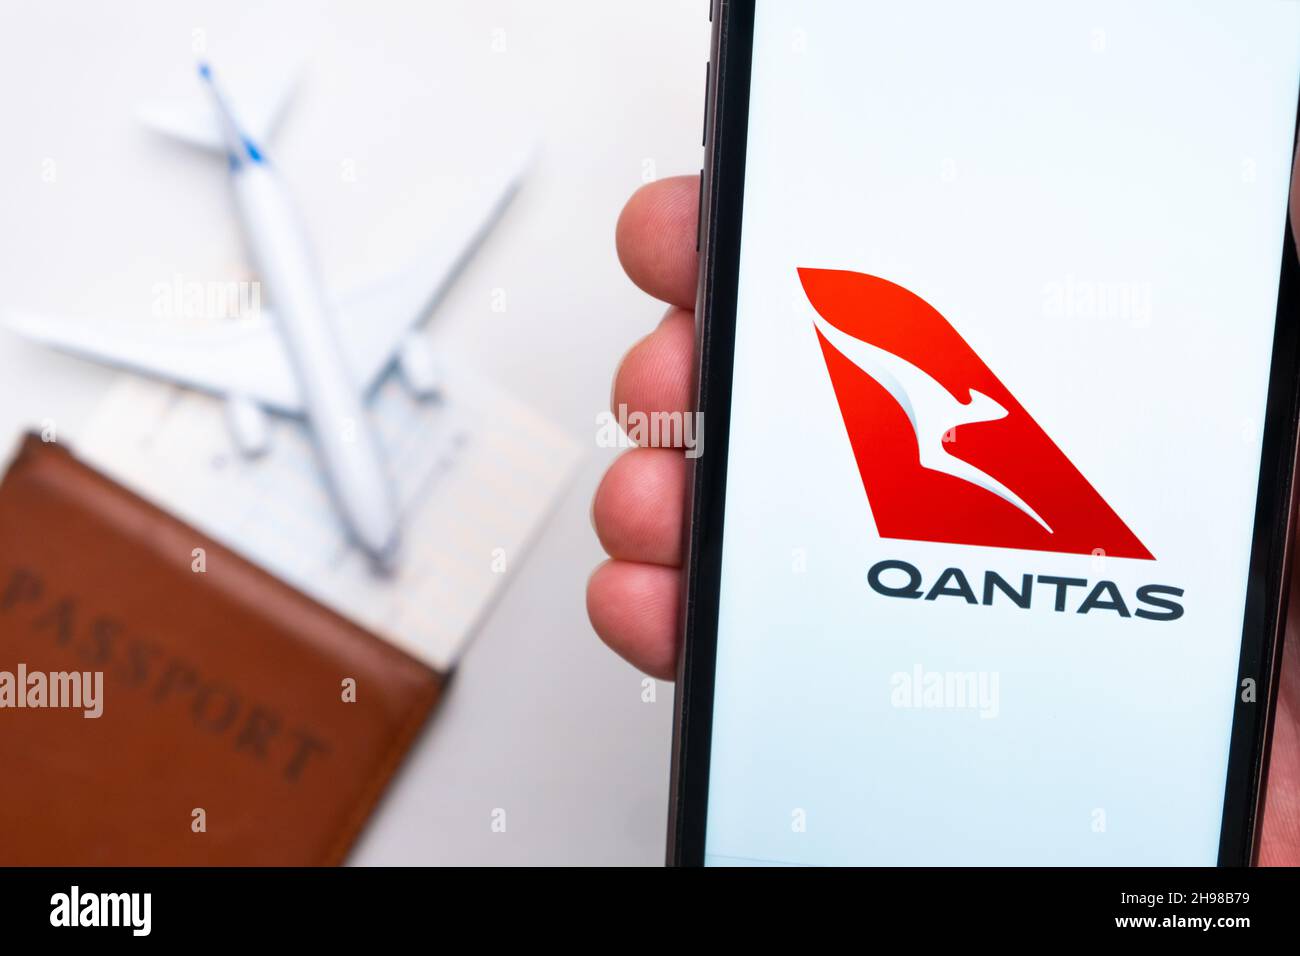 Qantas Airline logo on the mobile phone screen with a plane, passport and boarding pass on the background. The concept of the airlines mobile application. November 2021, San Francisco, USA Stock Photo